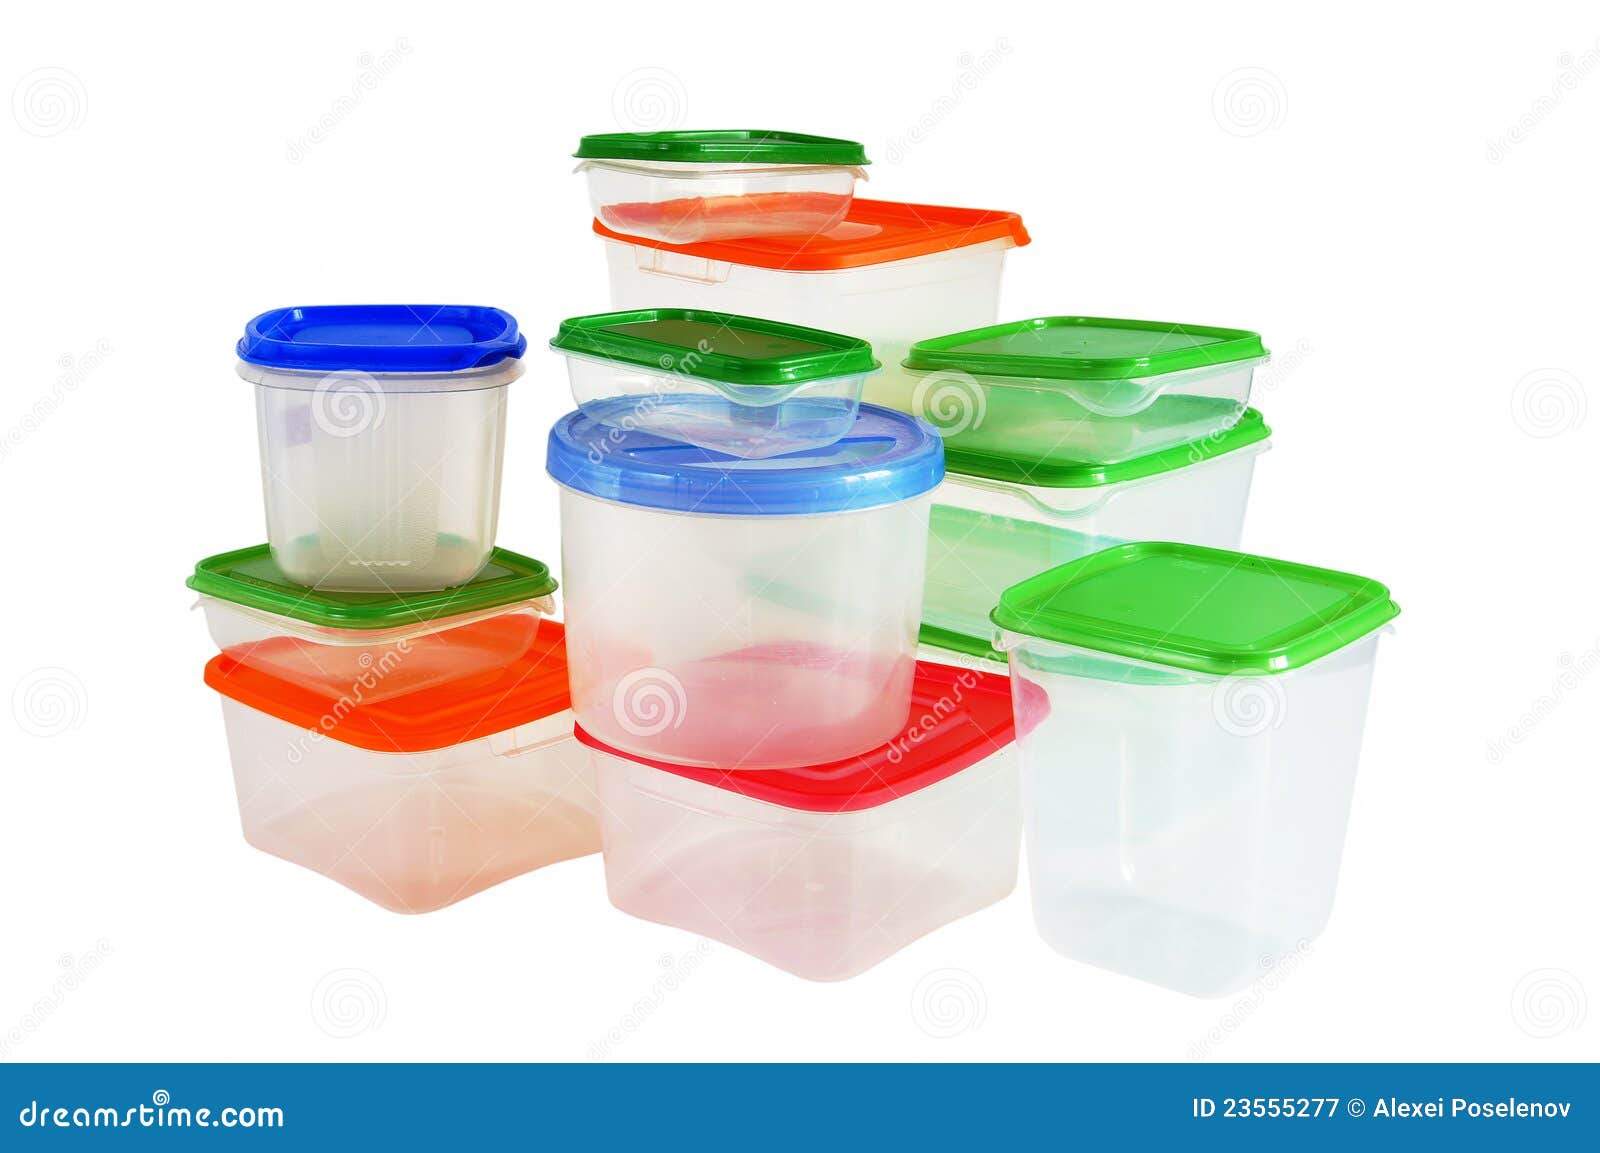 Transparent Plastic Boxes for Storage of Products Stock Image